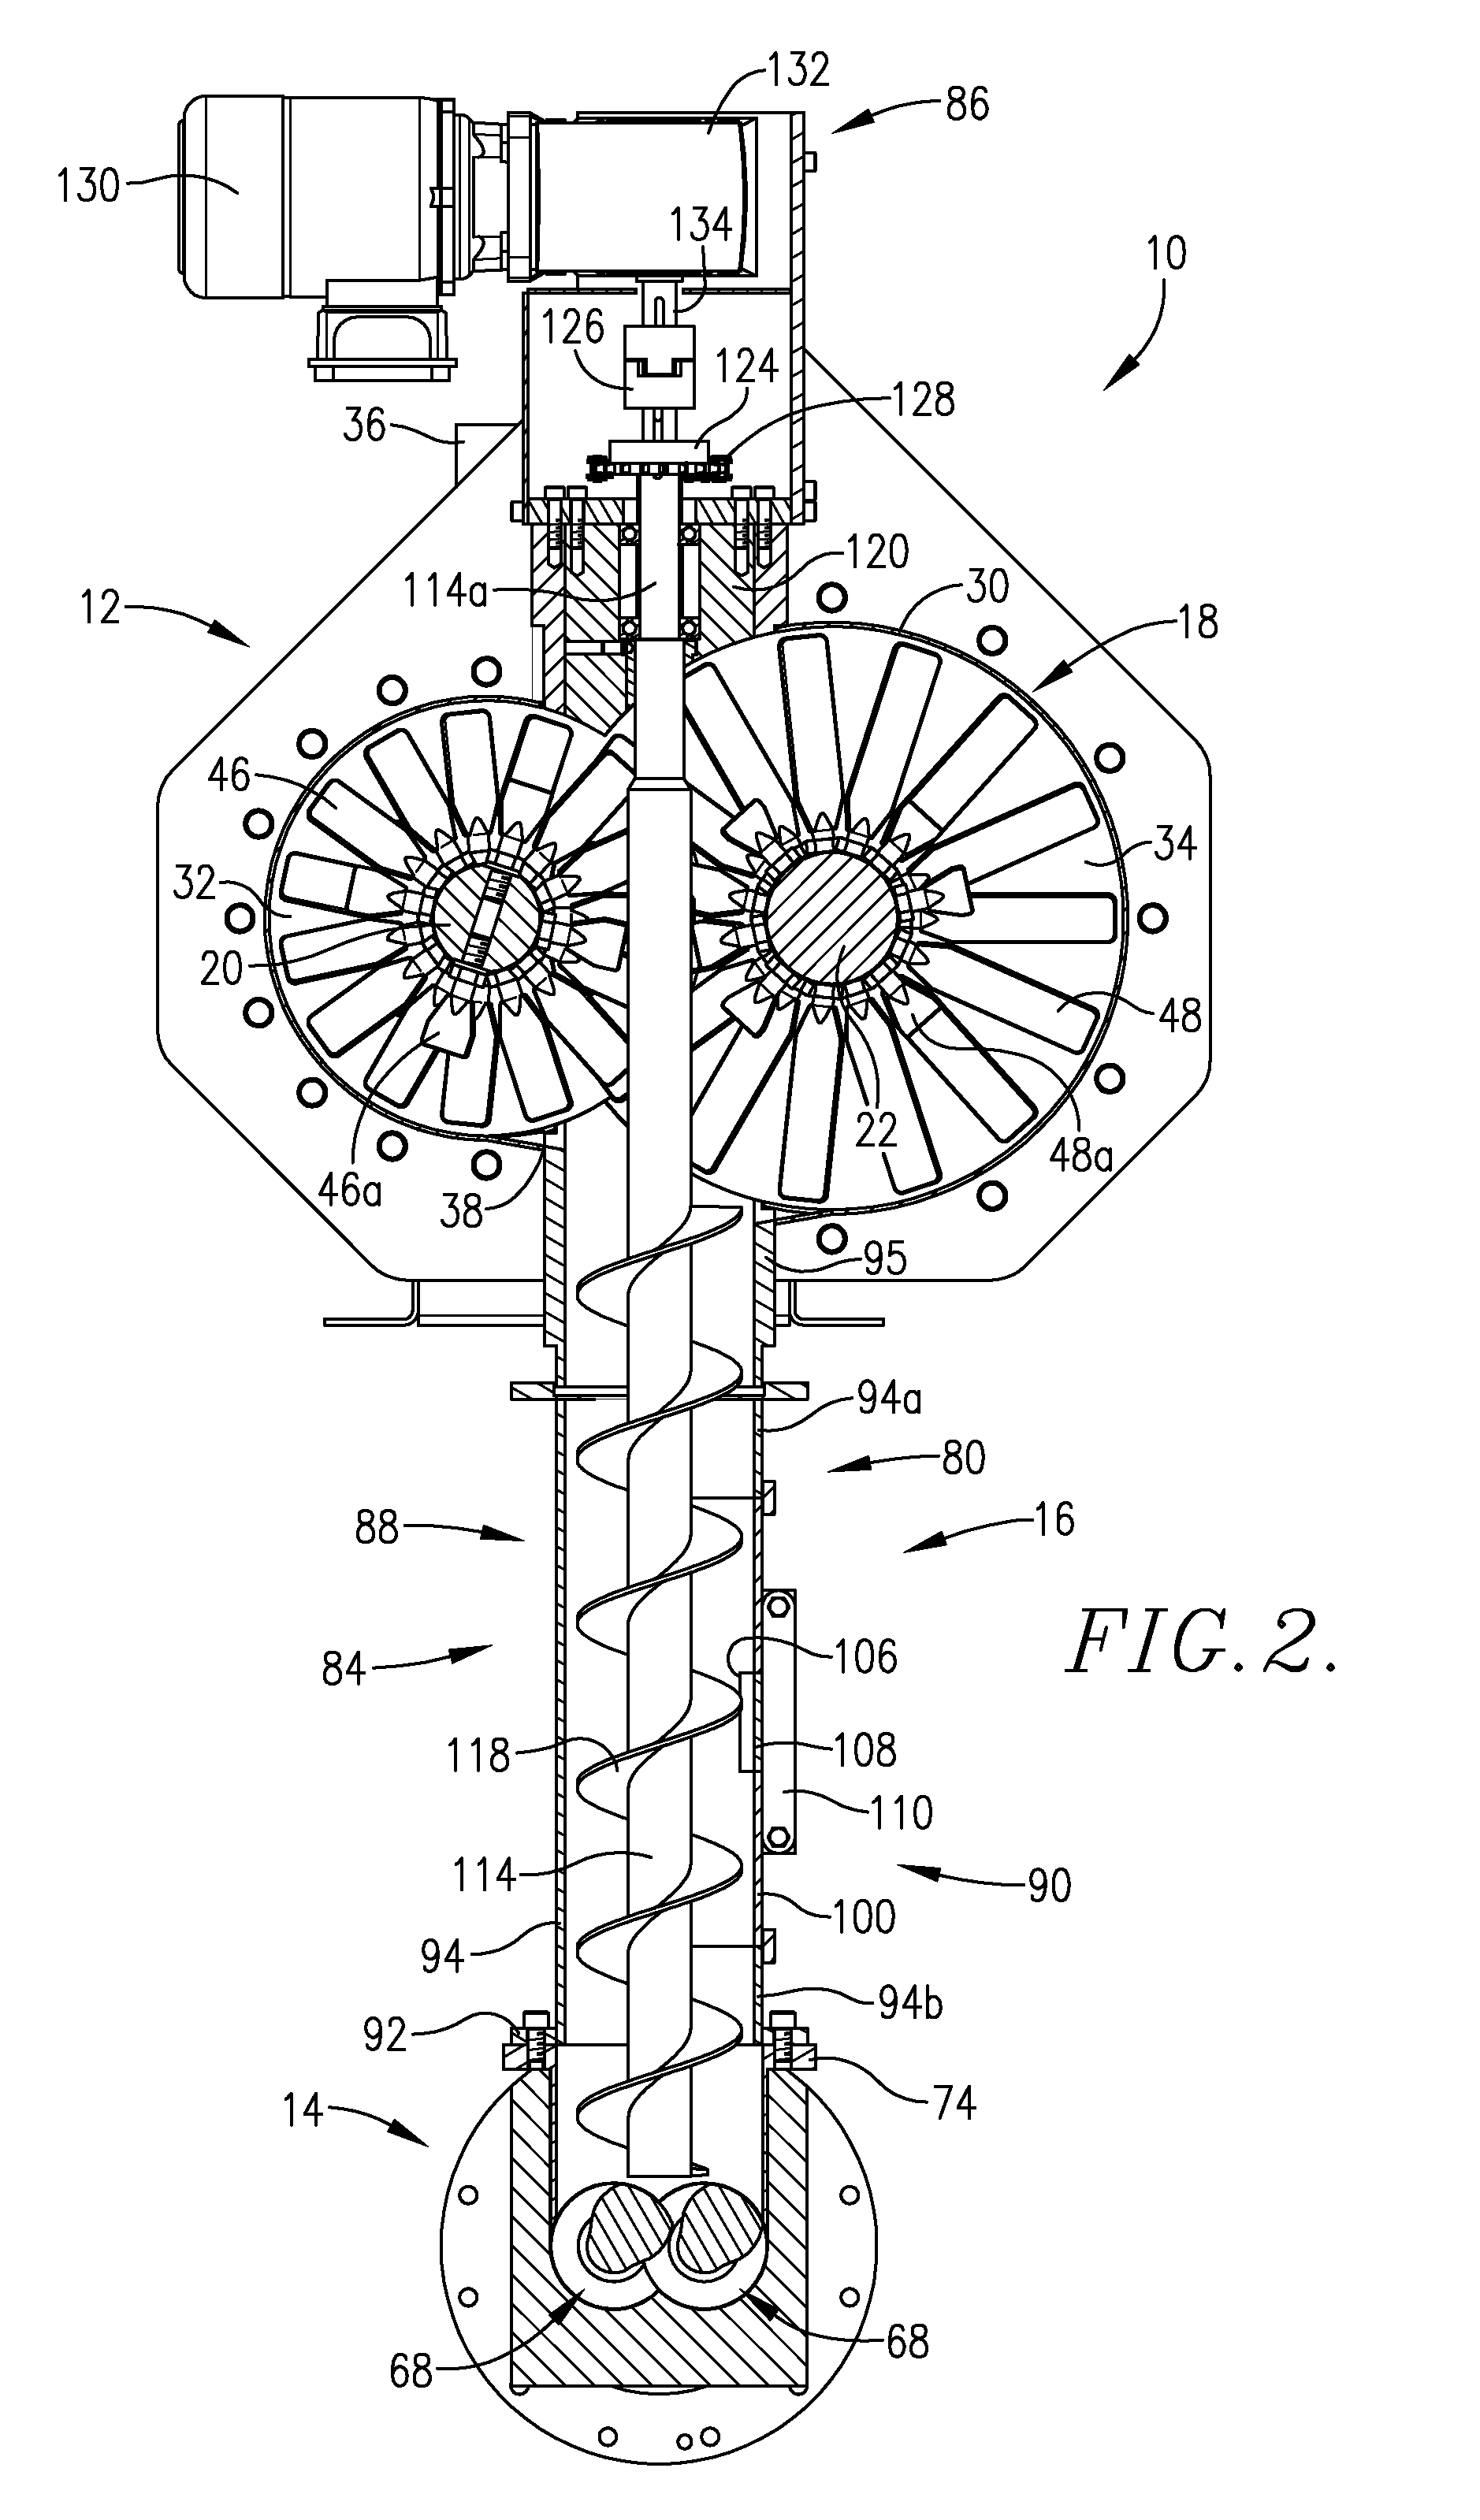 Apparatus for positive feeding from a preconditioner